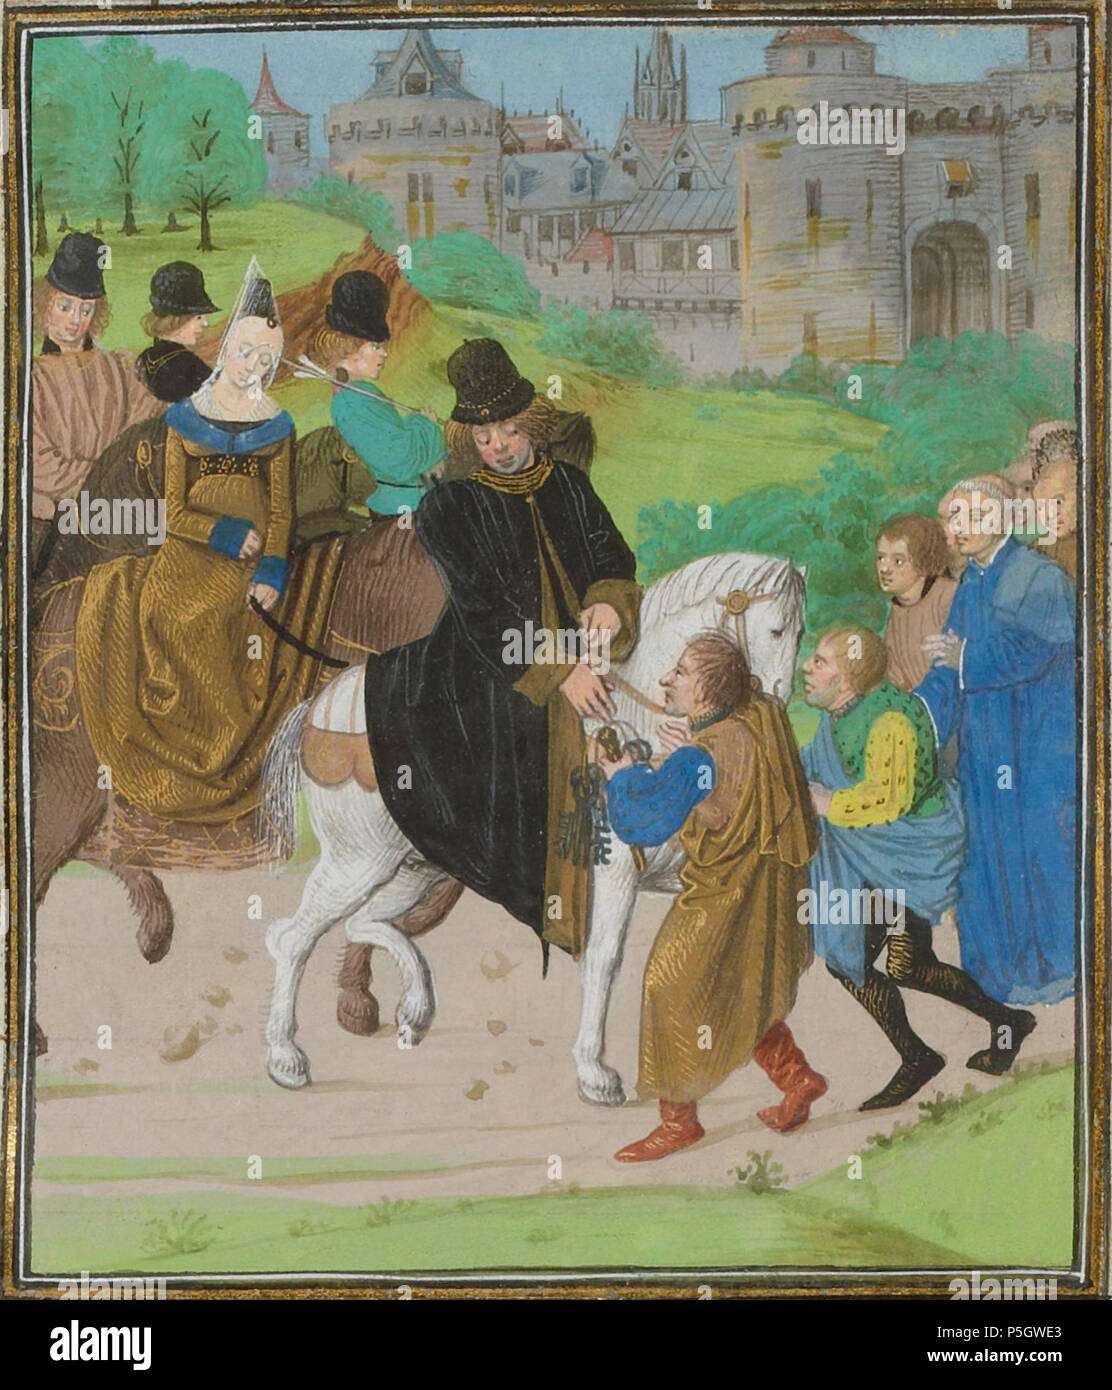 N/A. Surrender of Santiago de Compostela to John of Gaunt . 15th century.   Jean Froissart  (1337–1410)       Alternative names Jean Froissart. A chronicler of medieval France who wrote 'Froissart's Chronicles' which is an important source of information for the first half of the Hundred Years' War.  Description French chronicler, historian, canon, poet and writer  Date of birth/death 1330s 1405  Location of birth/death Valenciennes Chimay  Authority control  : Q315000 VIAF: 100178580 ISNI: 0000 0001 1821 9033 LCCN: n50023448 NLA: 35105465 Open Library: OL5960695A WorldCat 485 Dukeoflancaster Stock Photo